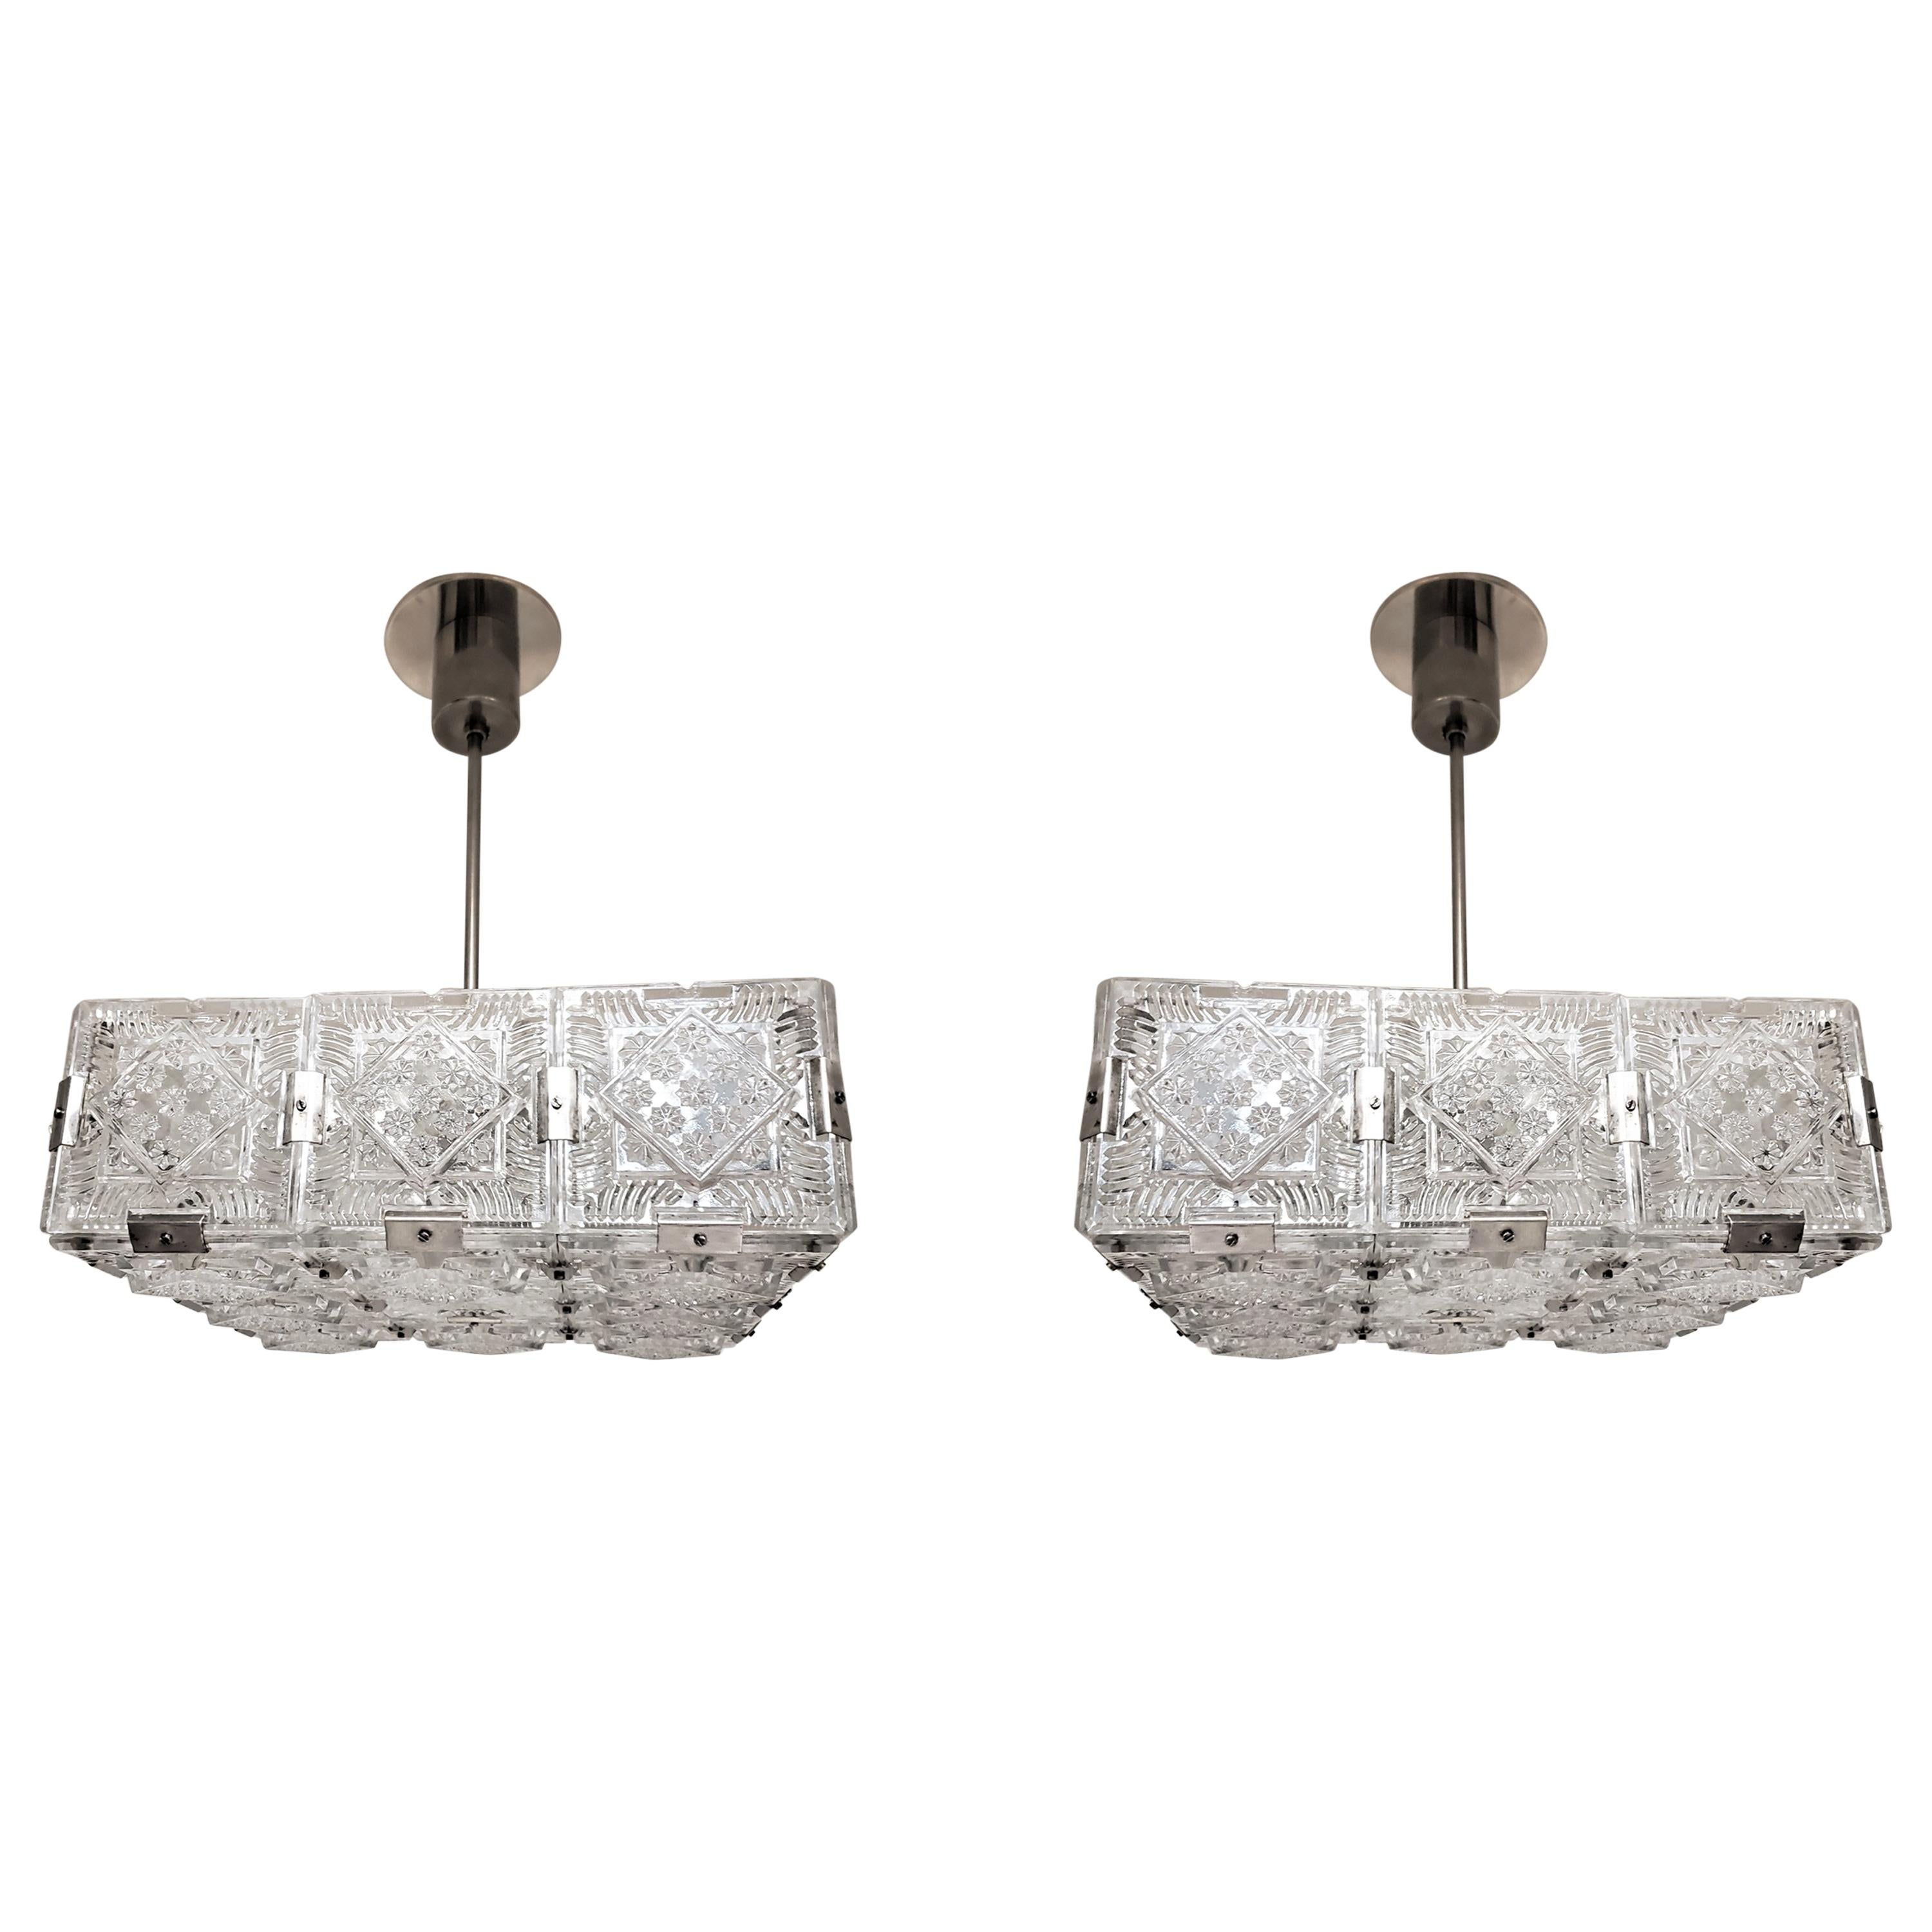 Pair of Mid-Century Modern Square Chandeliers in Glass and Nickel For Sale